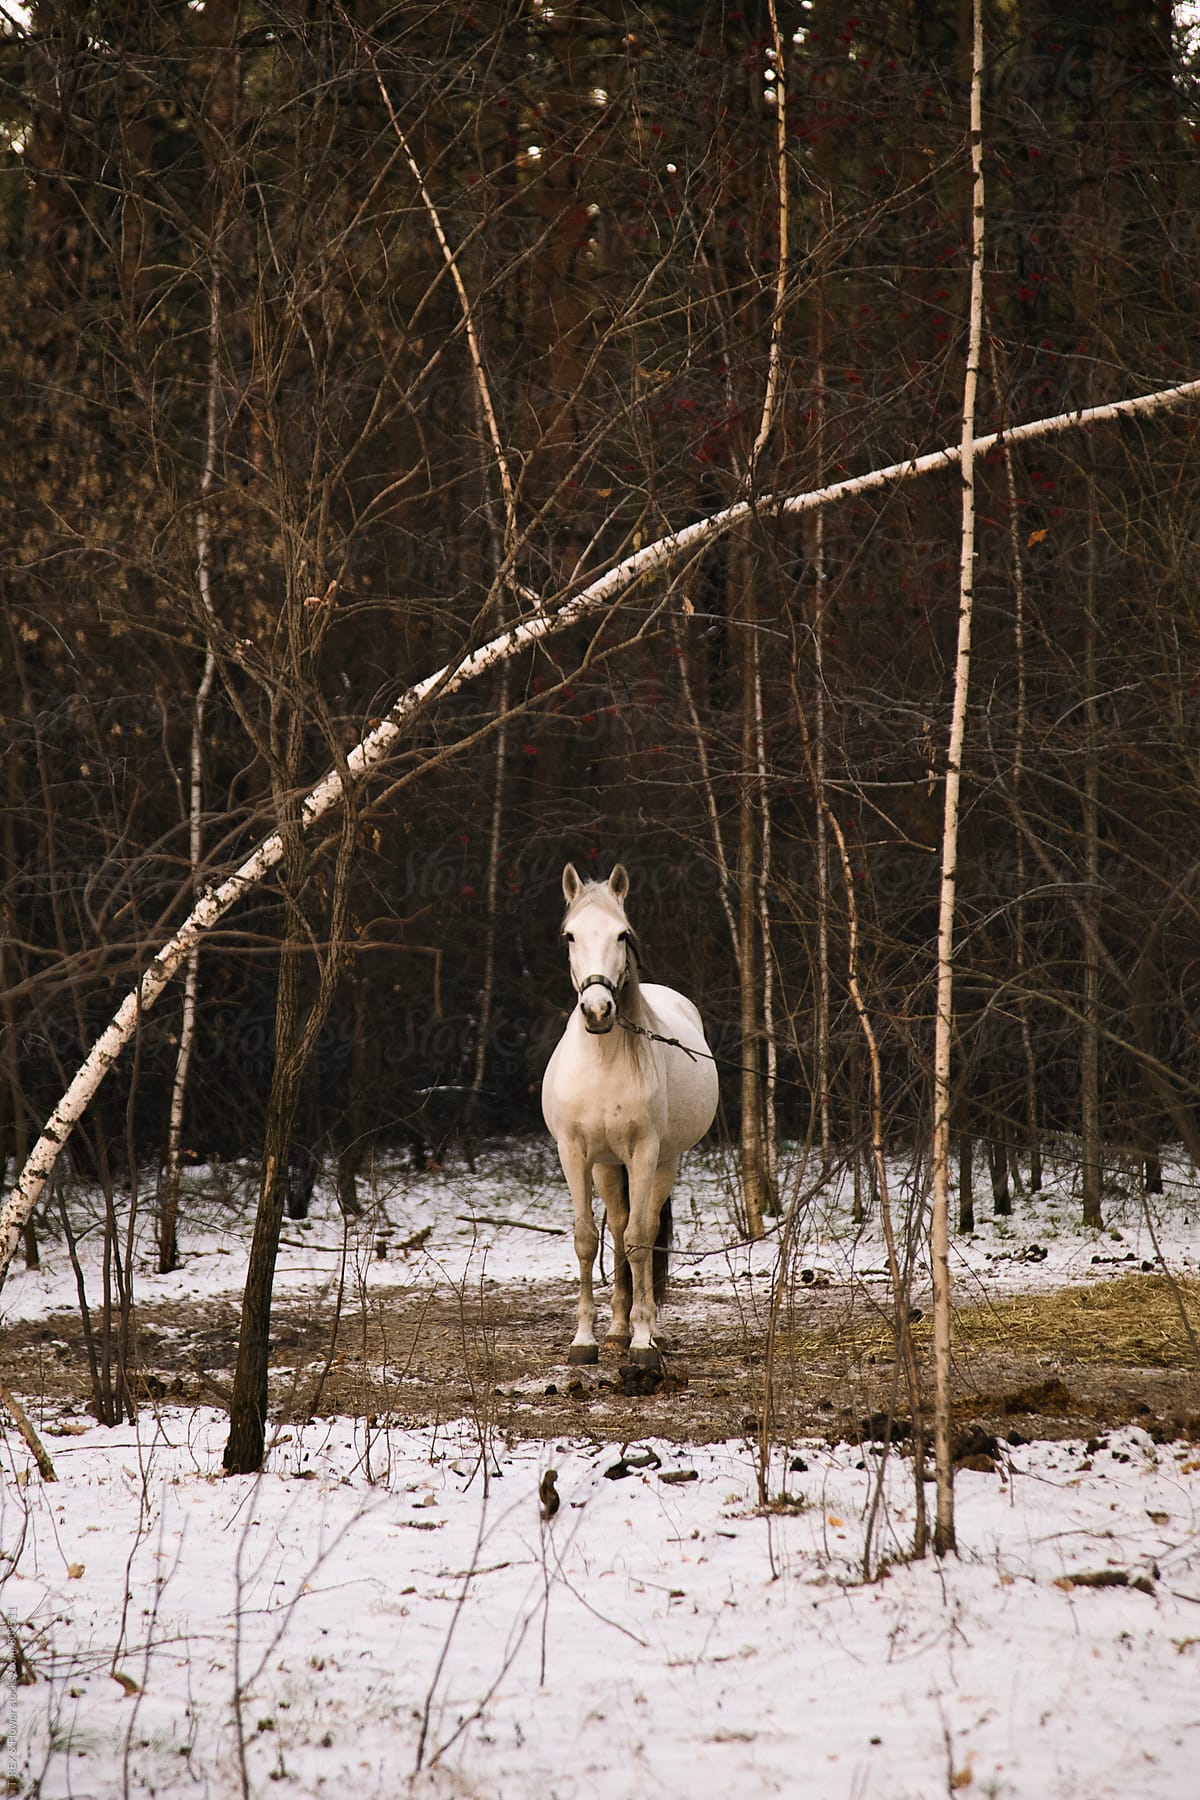 White horse on lead looking at camera